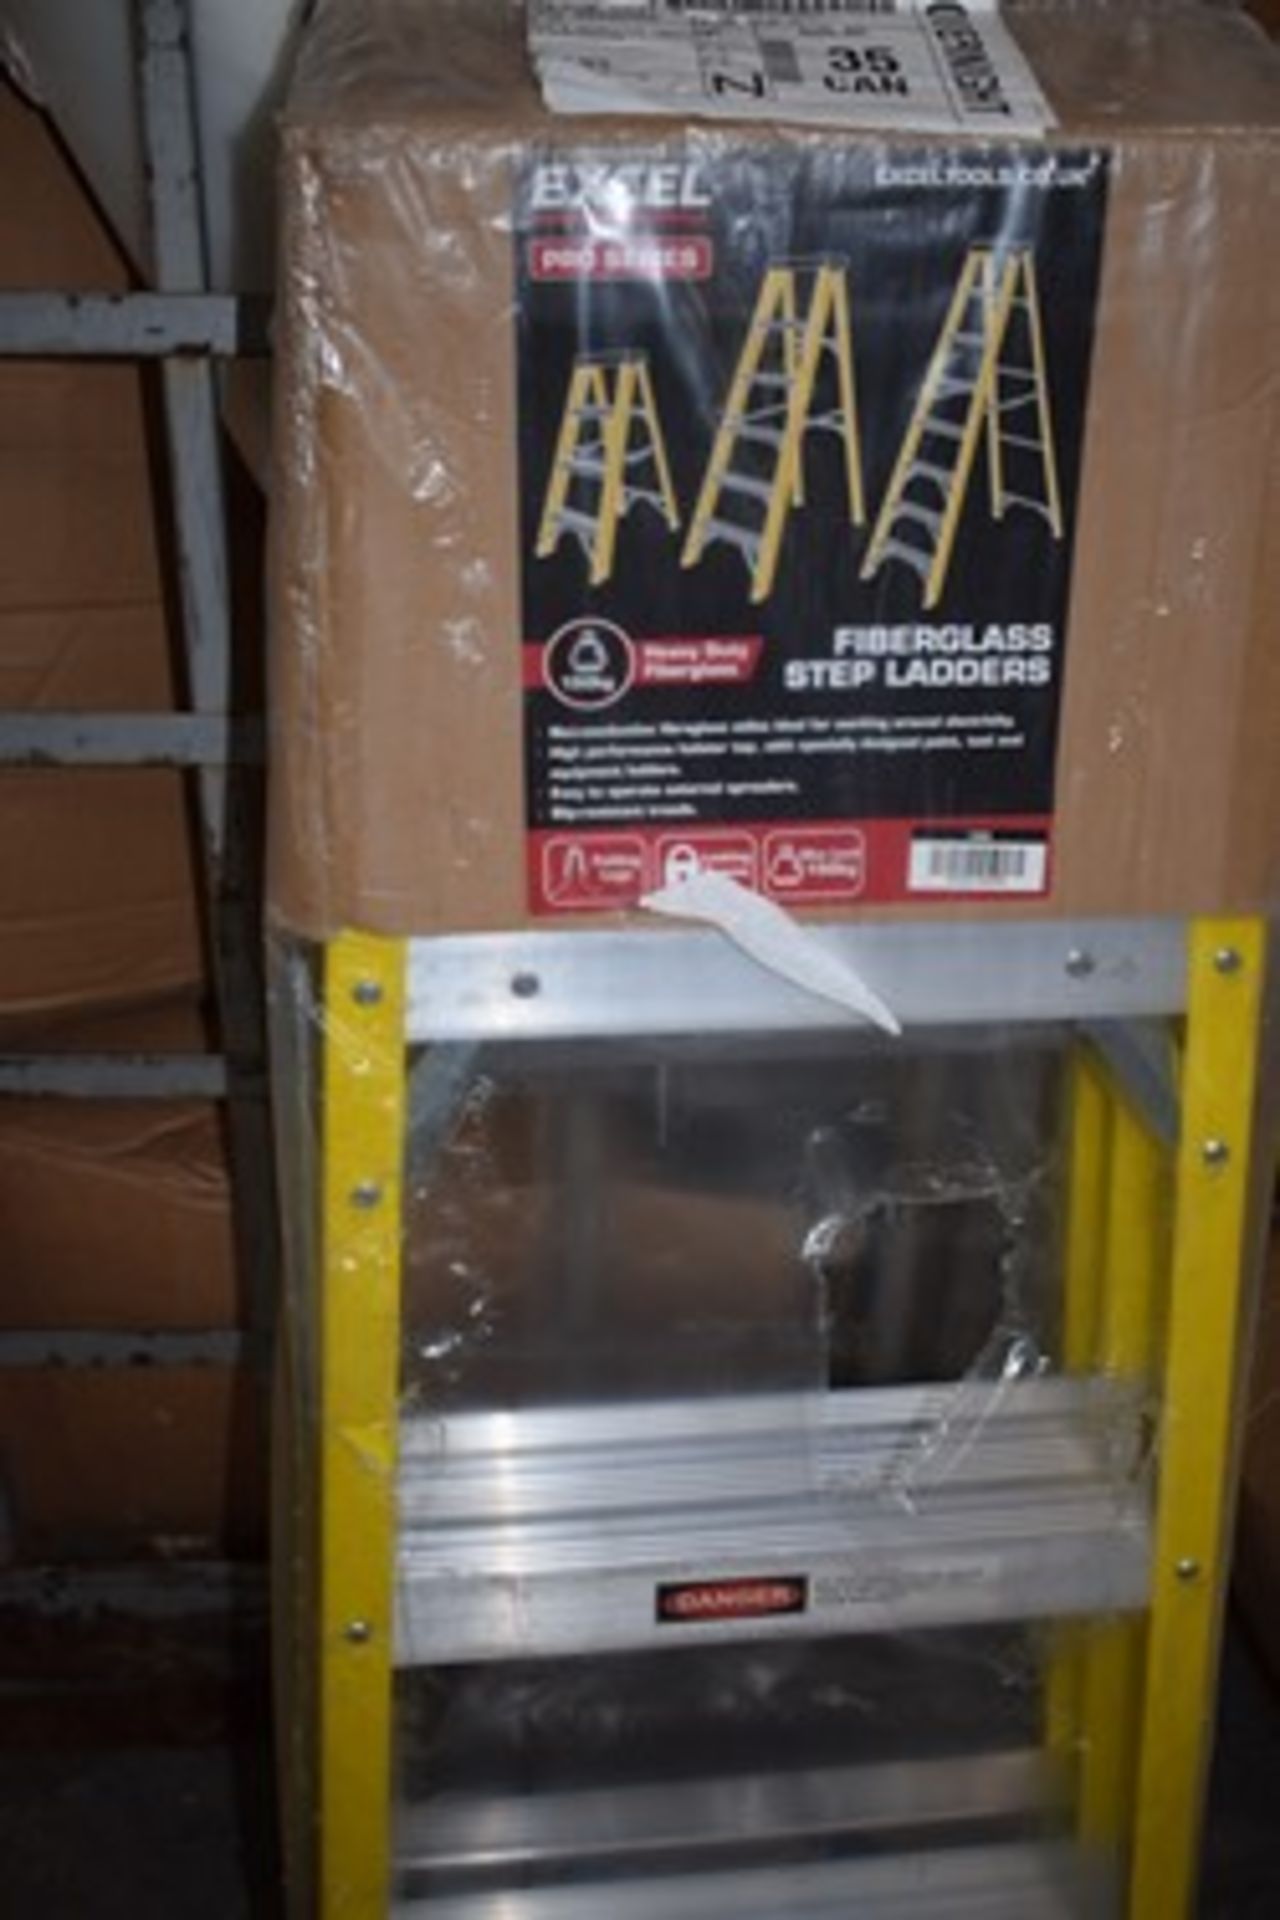 1 x Series yellow fibre glass step ladder - New in pack (GS4 end)